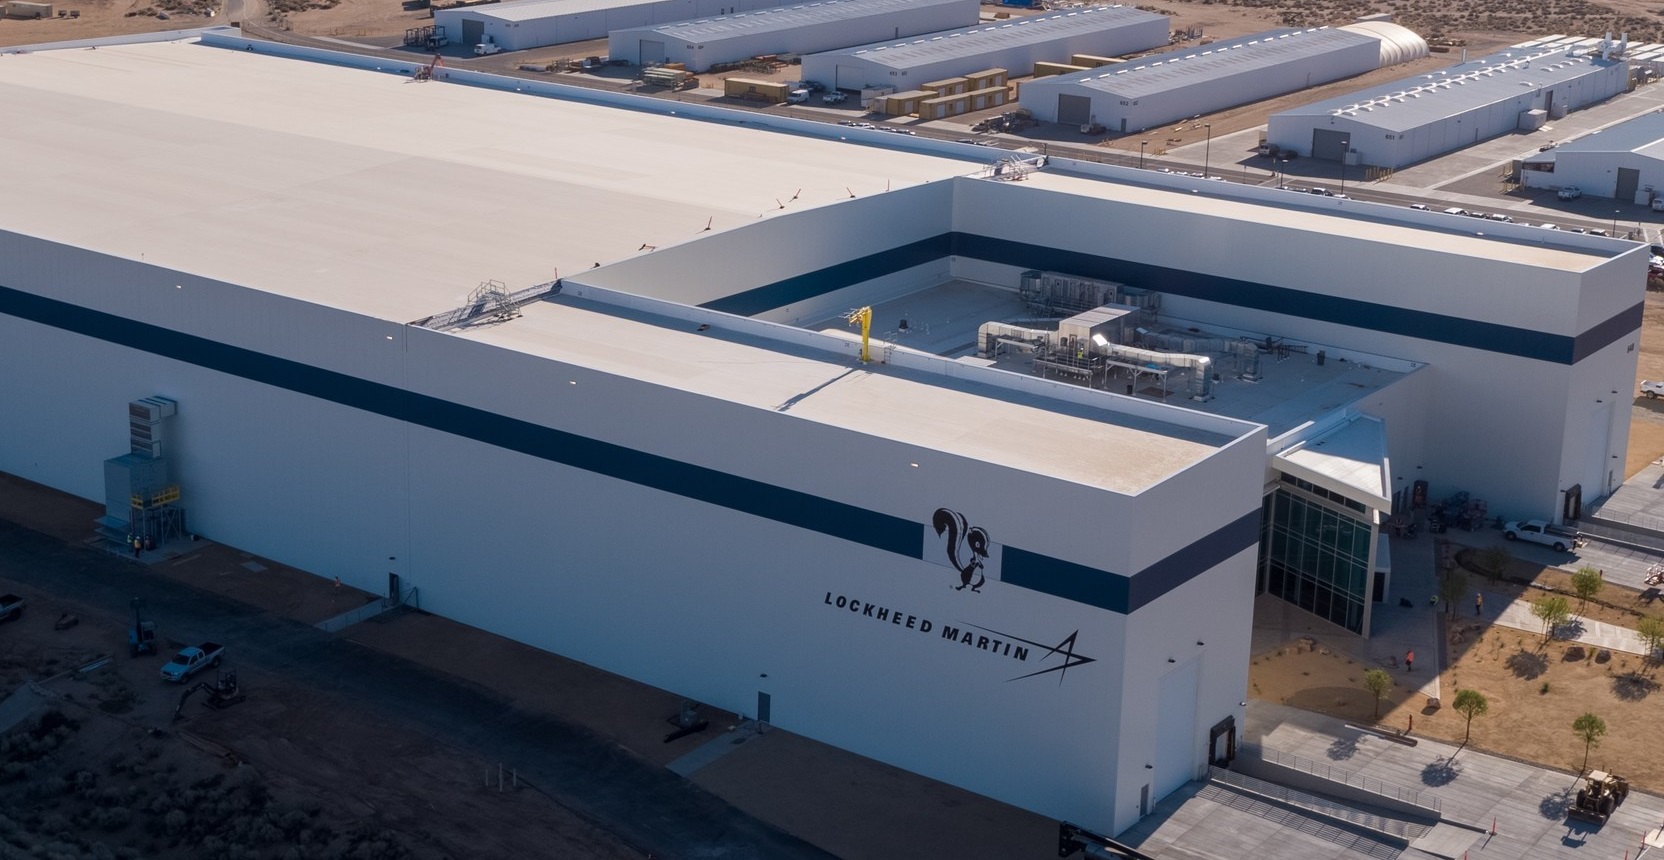 Lockheed Martin’s Advanced Manufacturing Facility at the Skunk Works® in Palmdale, California